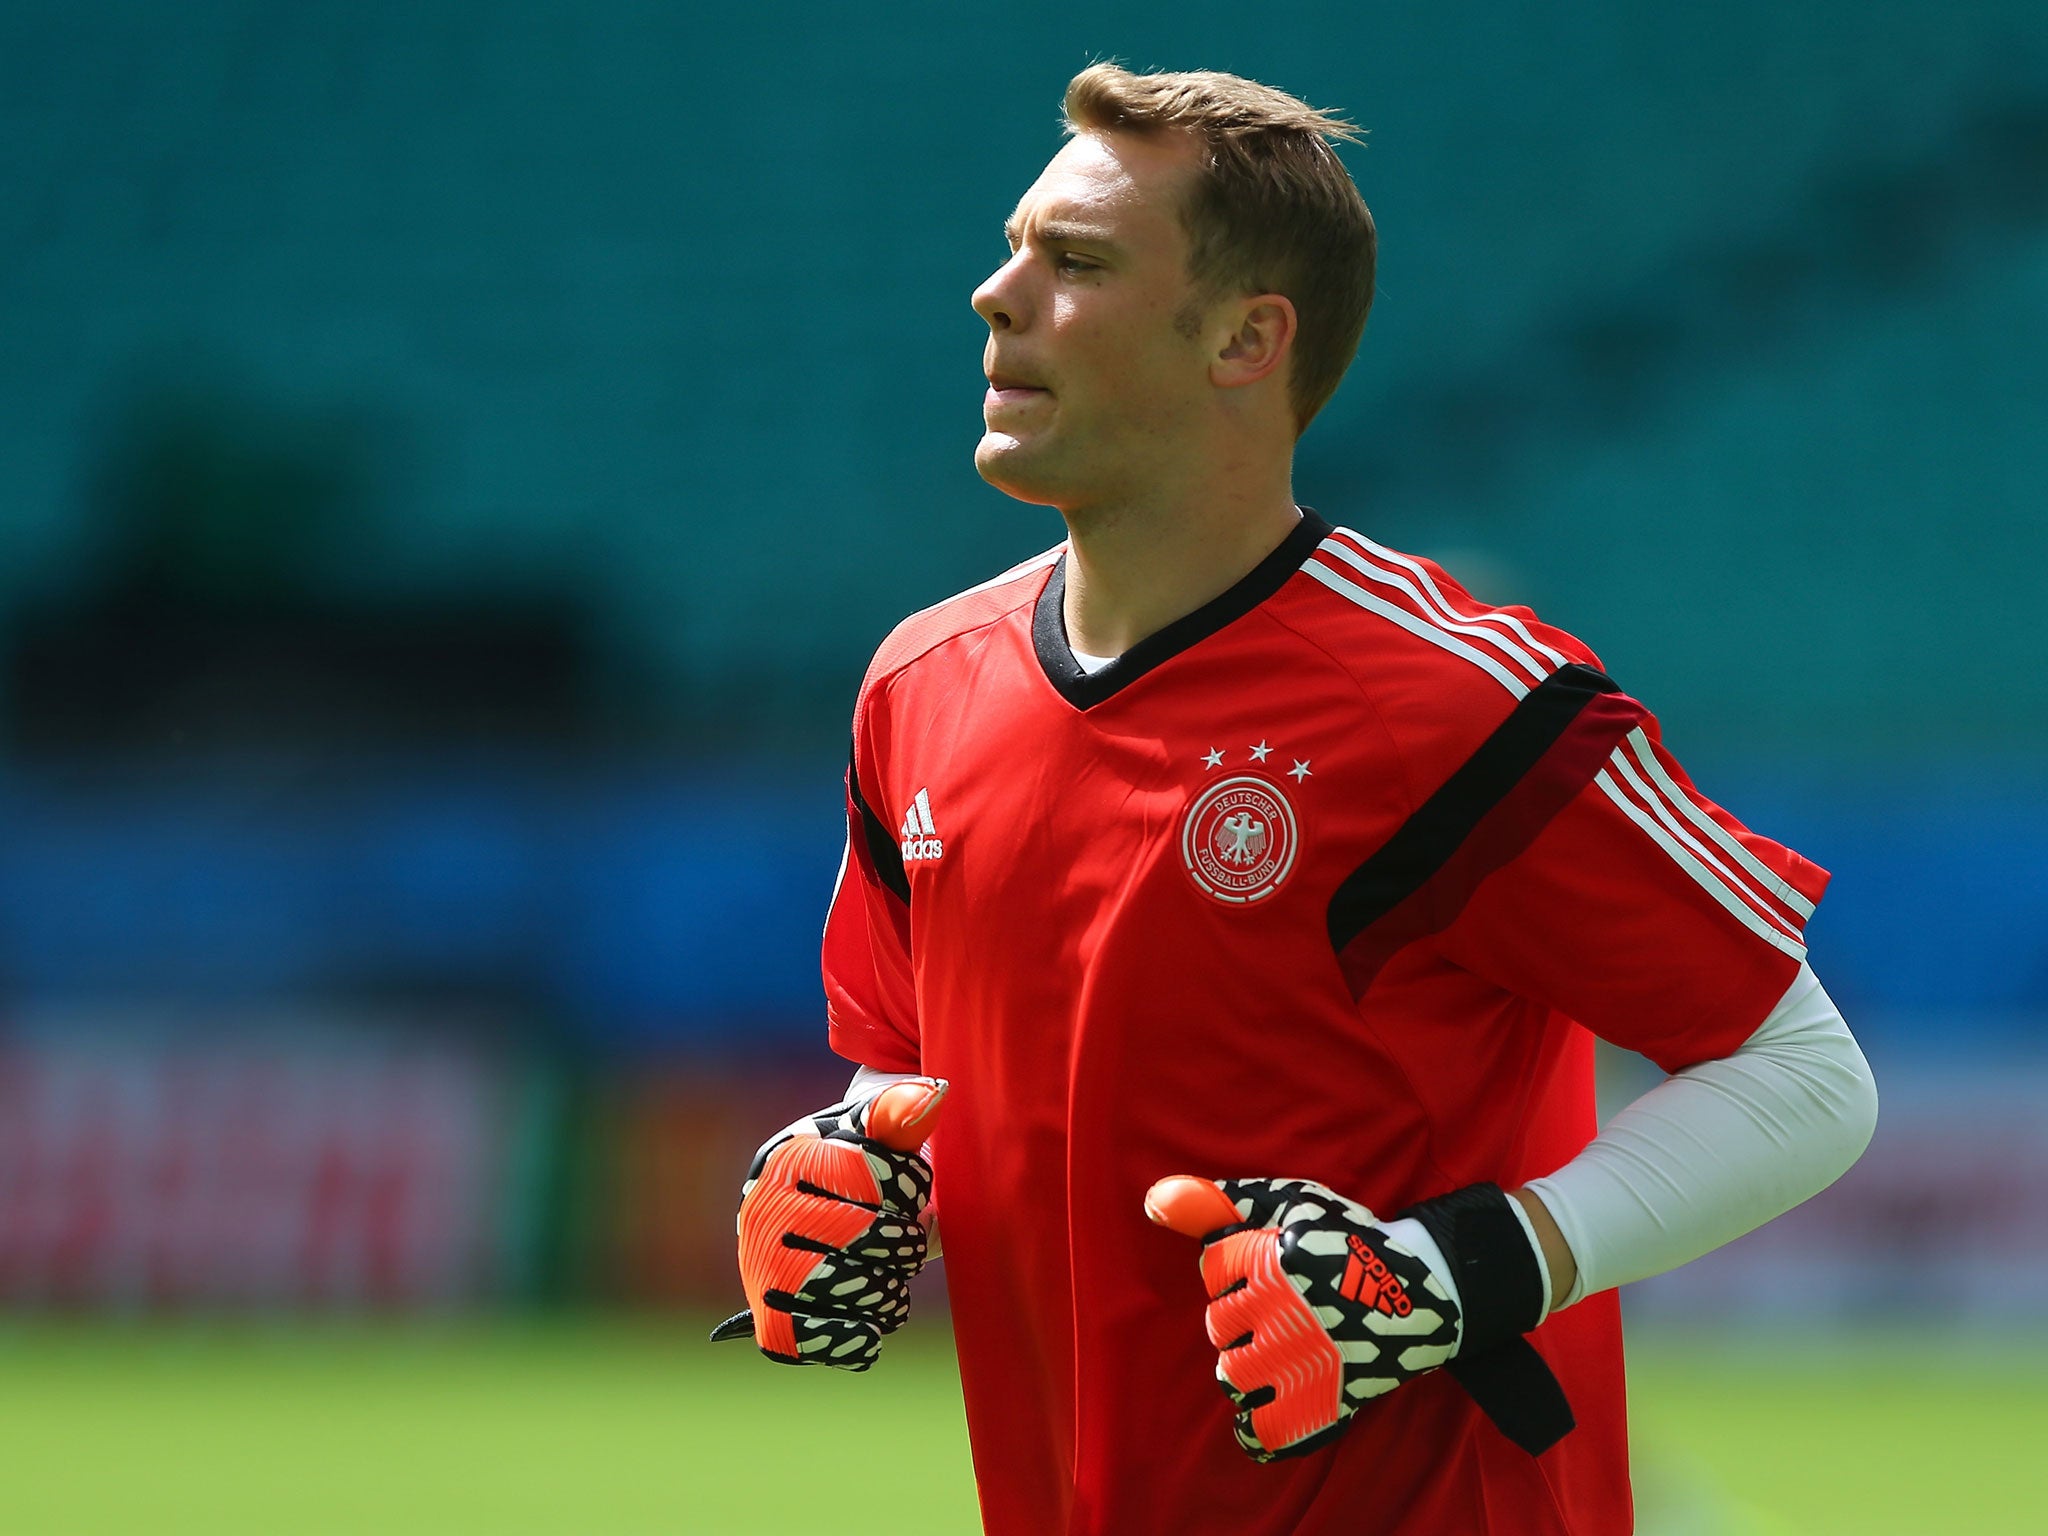 Manuel Neuer wants Germany to use the weight of expectation to their advantage when they take on Portugal on Monday